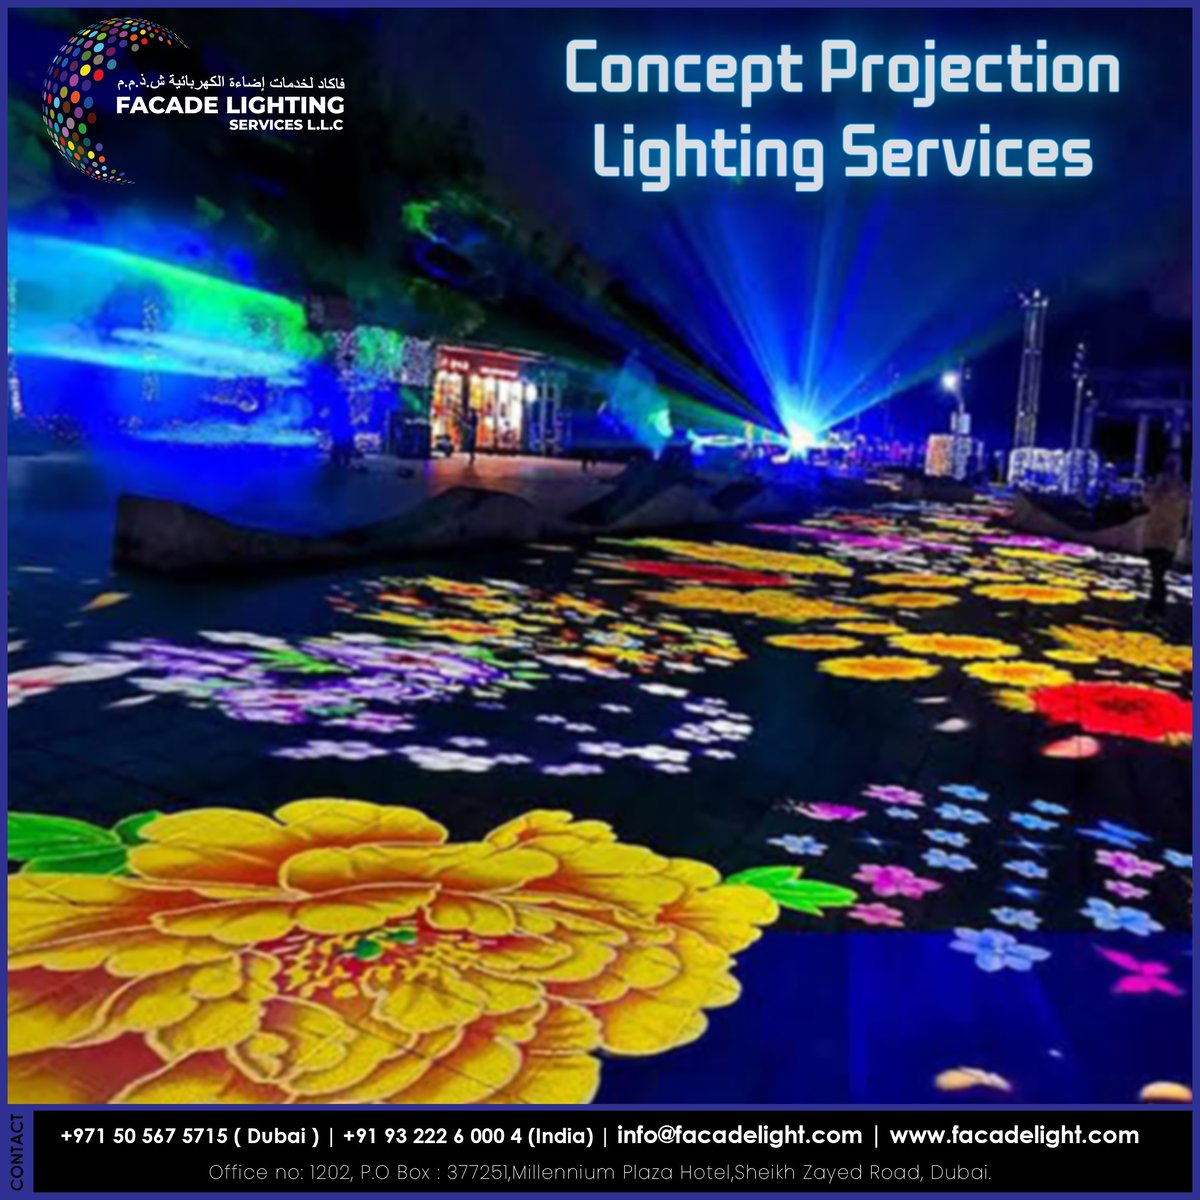 🌟 Experience the future of #lighting with our concept projection lighting services in Dubai! 

Contact @https://facadelight.com/

#facadelightingservices #facadelighting #exteriorlighting #lightinstallation #lightingmanufacturer #lightingsupplier #conceptlighting #eventlighting